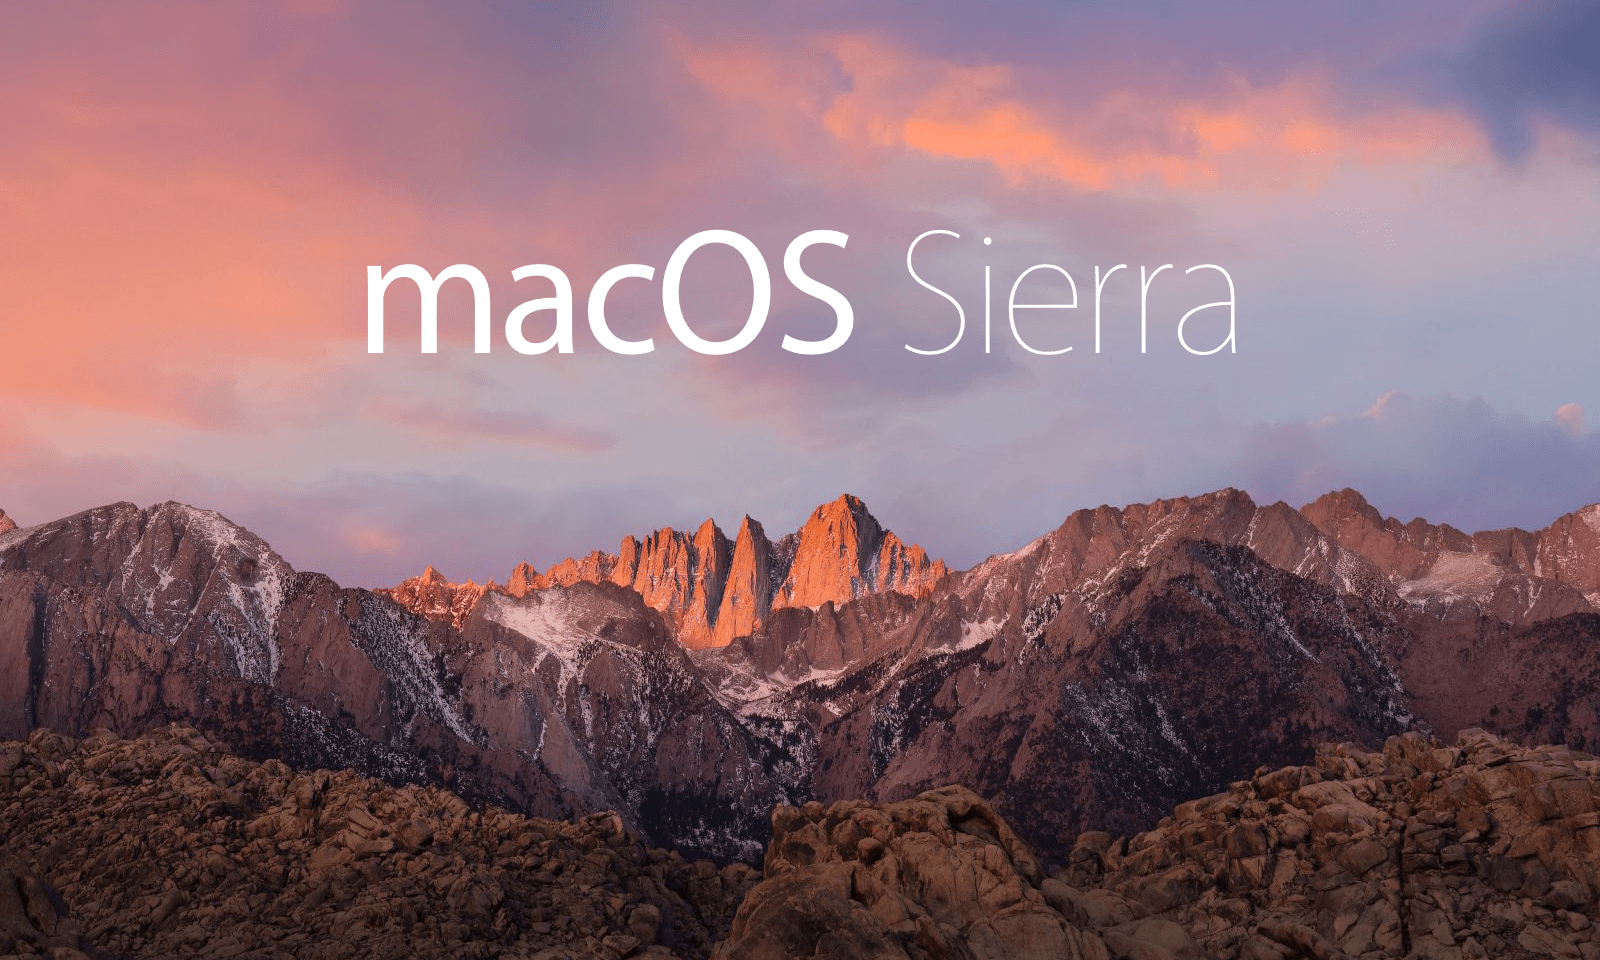 quicktime for mac os sierra